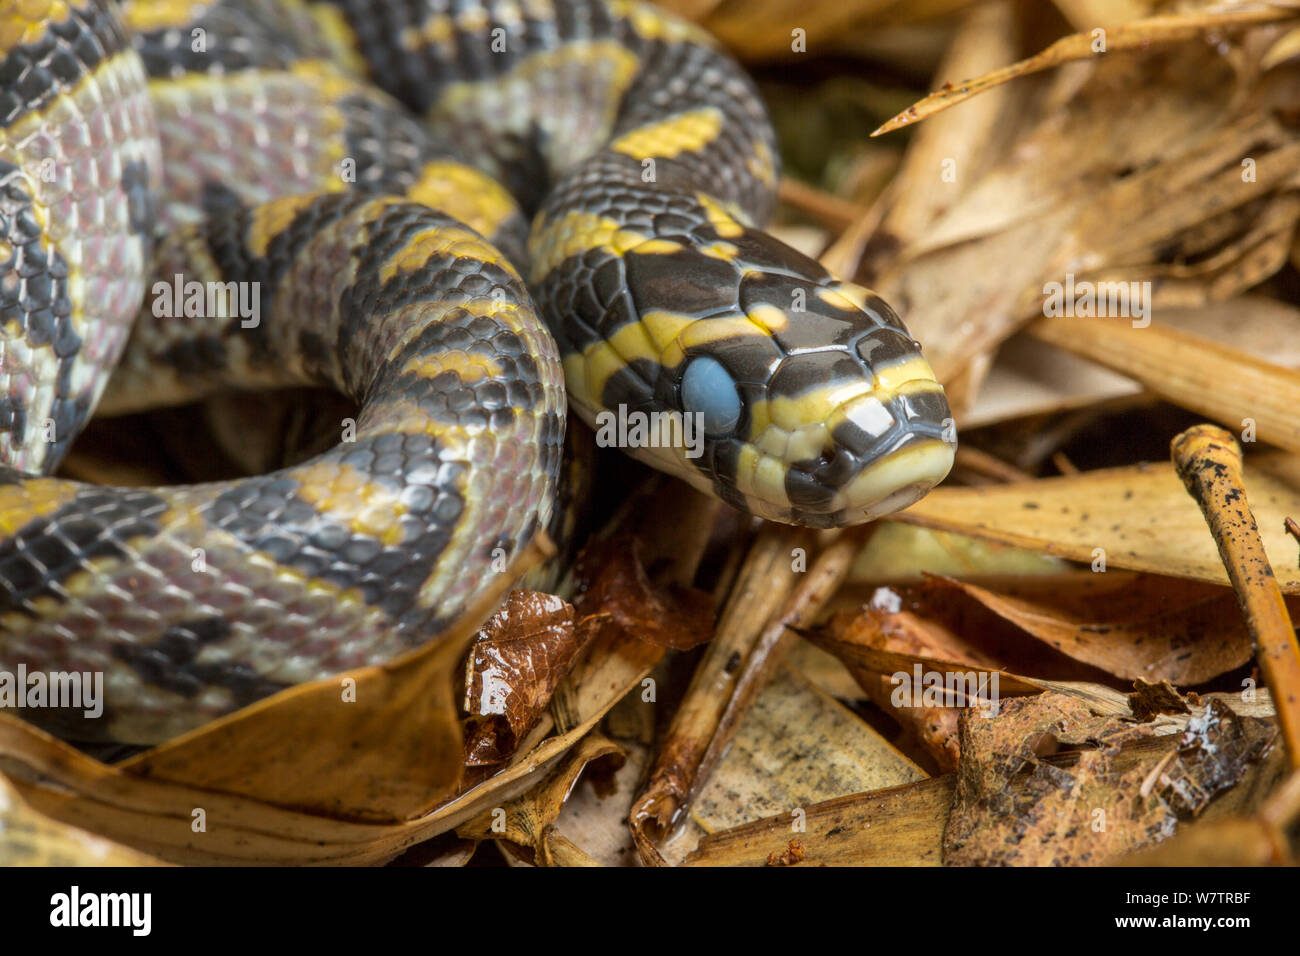 Mandarin ratsnake (Euprepiophis  mandarinus) with its eyes clouded over indicating a pre-shed condition. Captive. Stock Photo